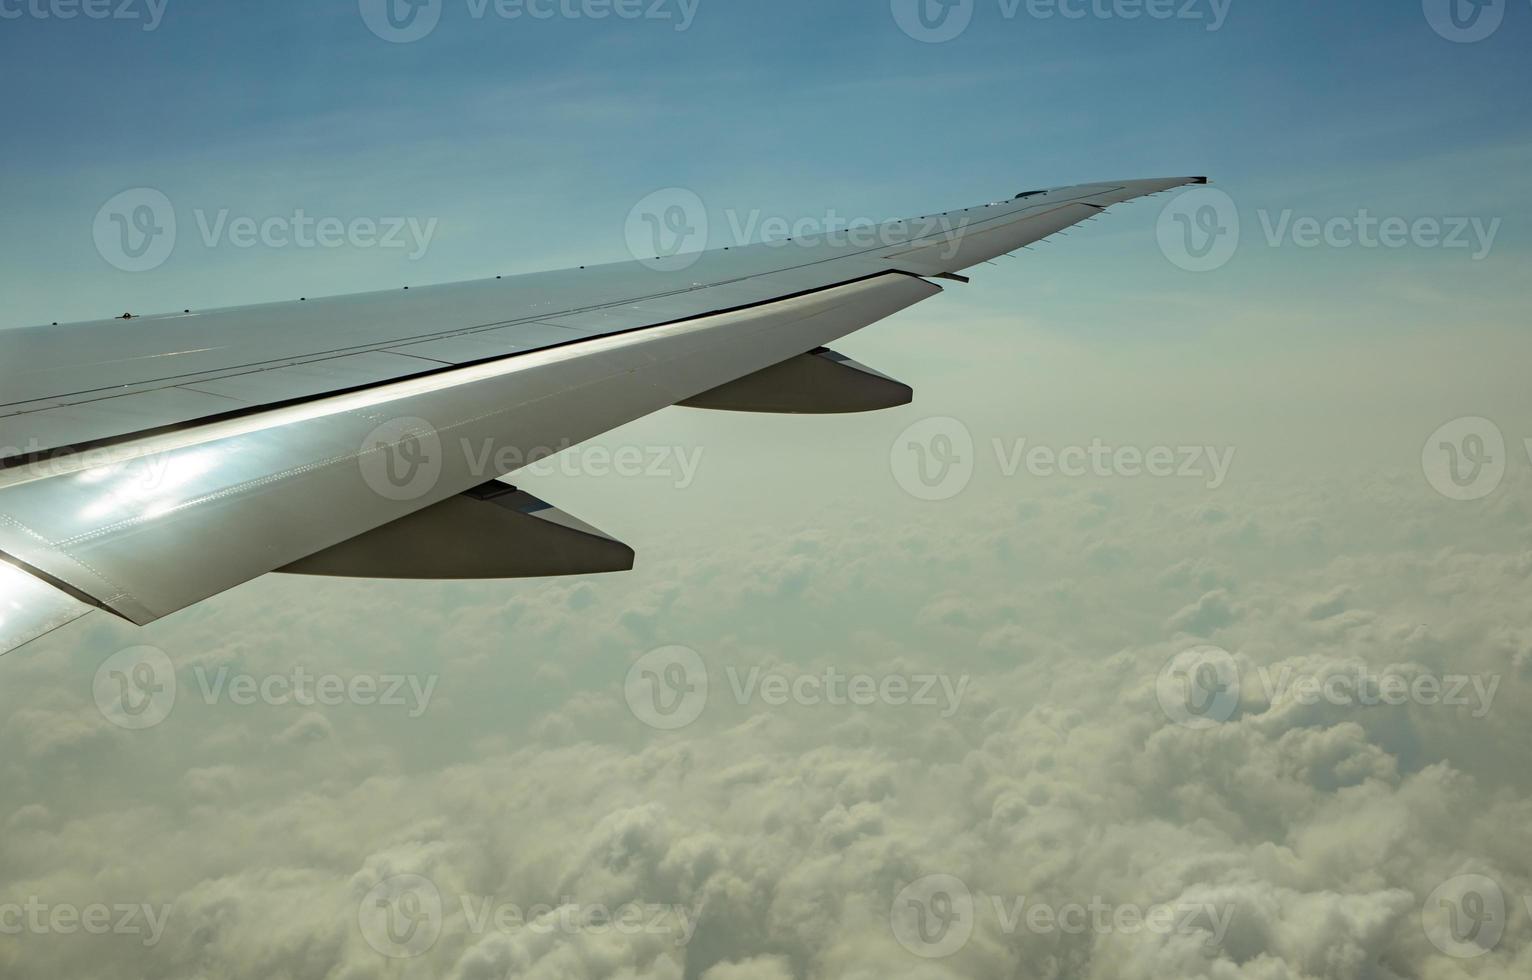 Wing of plane over white clouds. Airplane flying on blue sky. Scenic view from airplane window. Commercial airline flight. Plane wing above clouds. Flight mechanics concept. International flight. photo